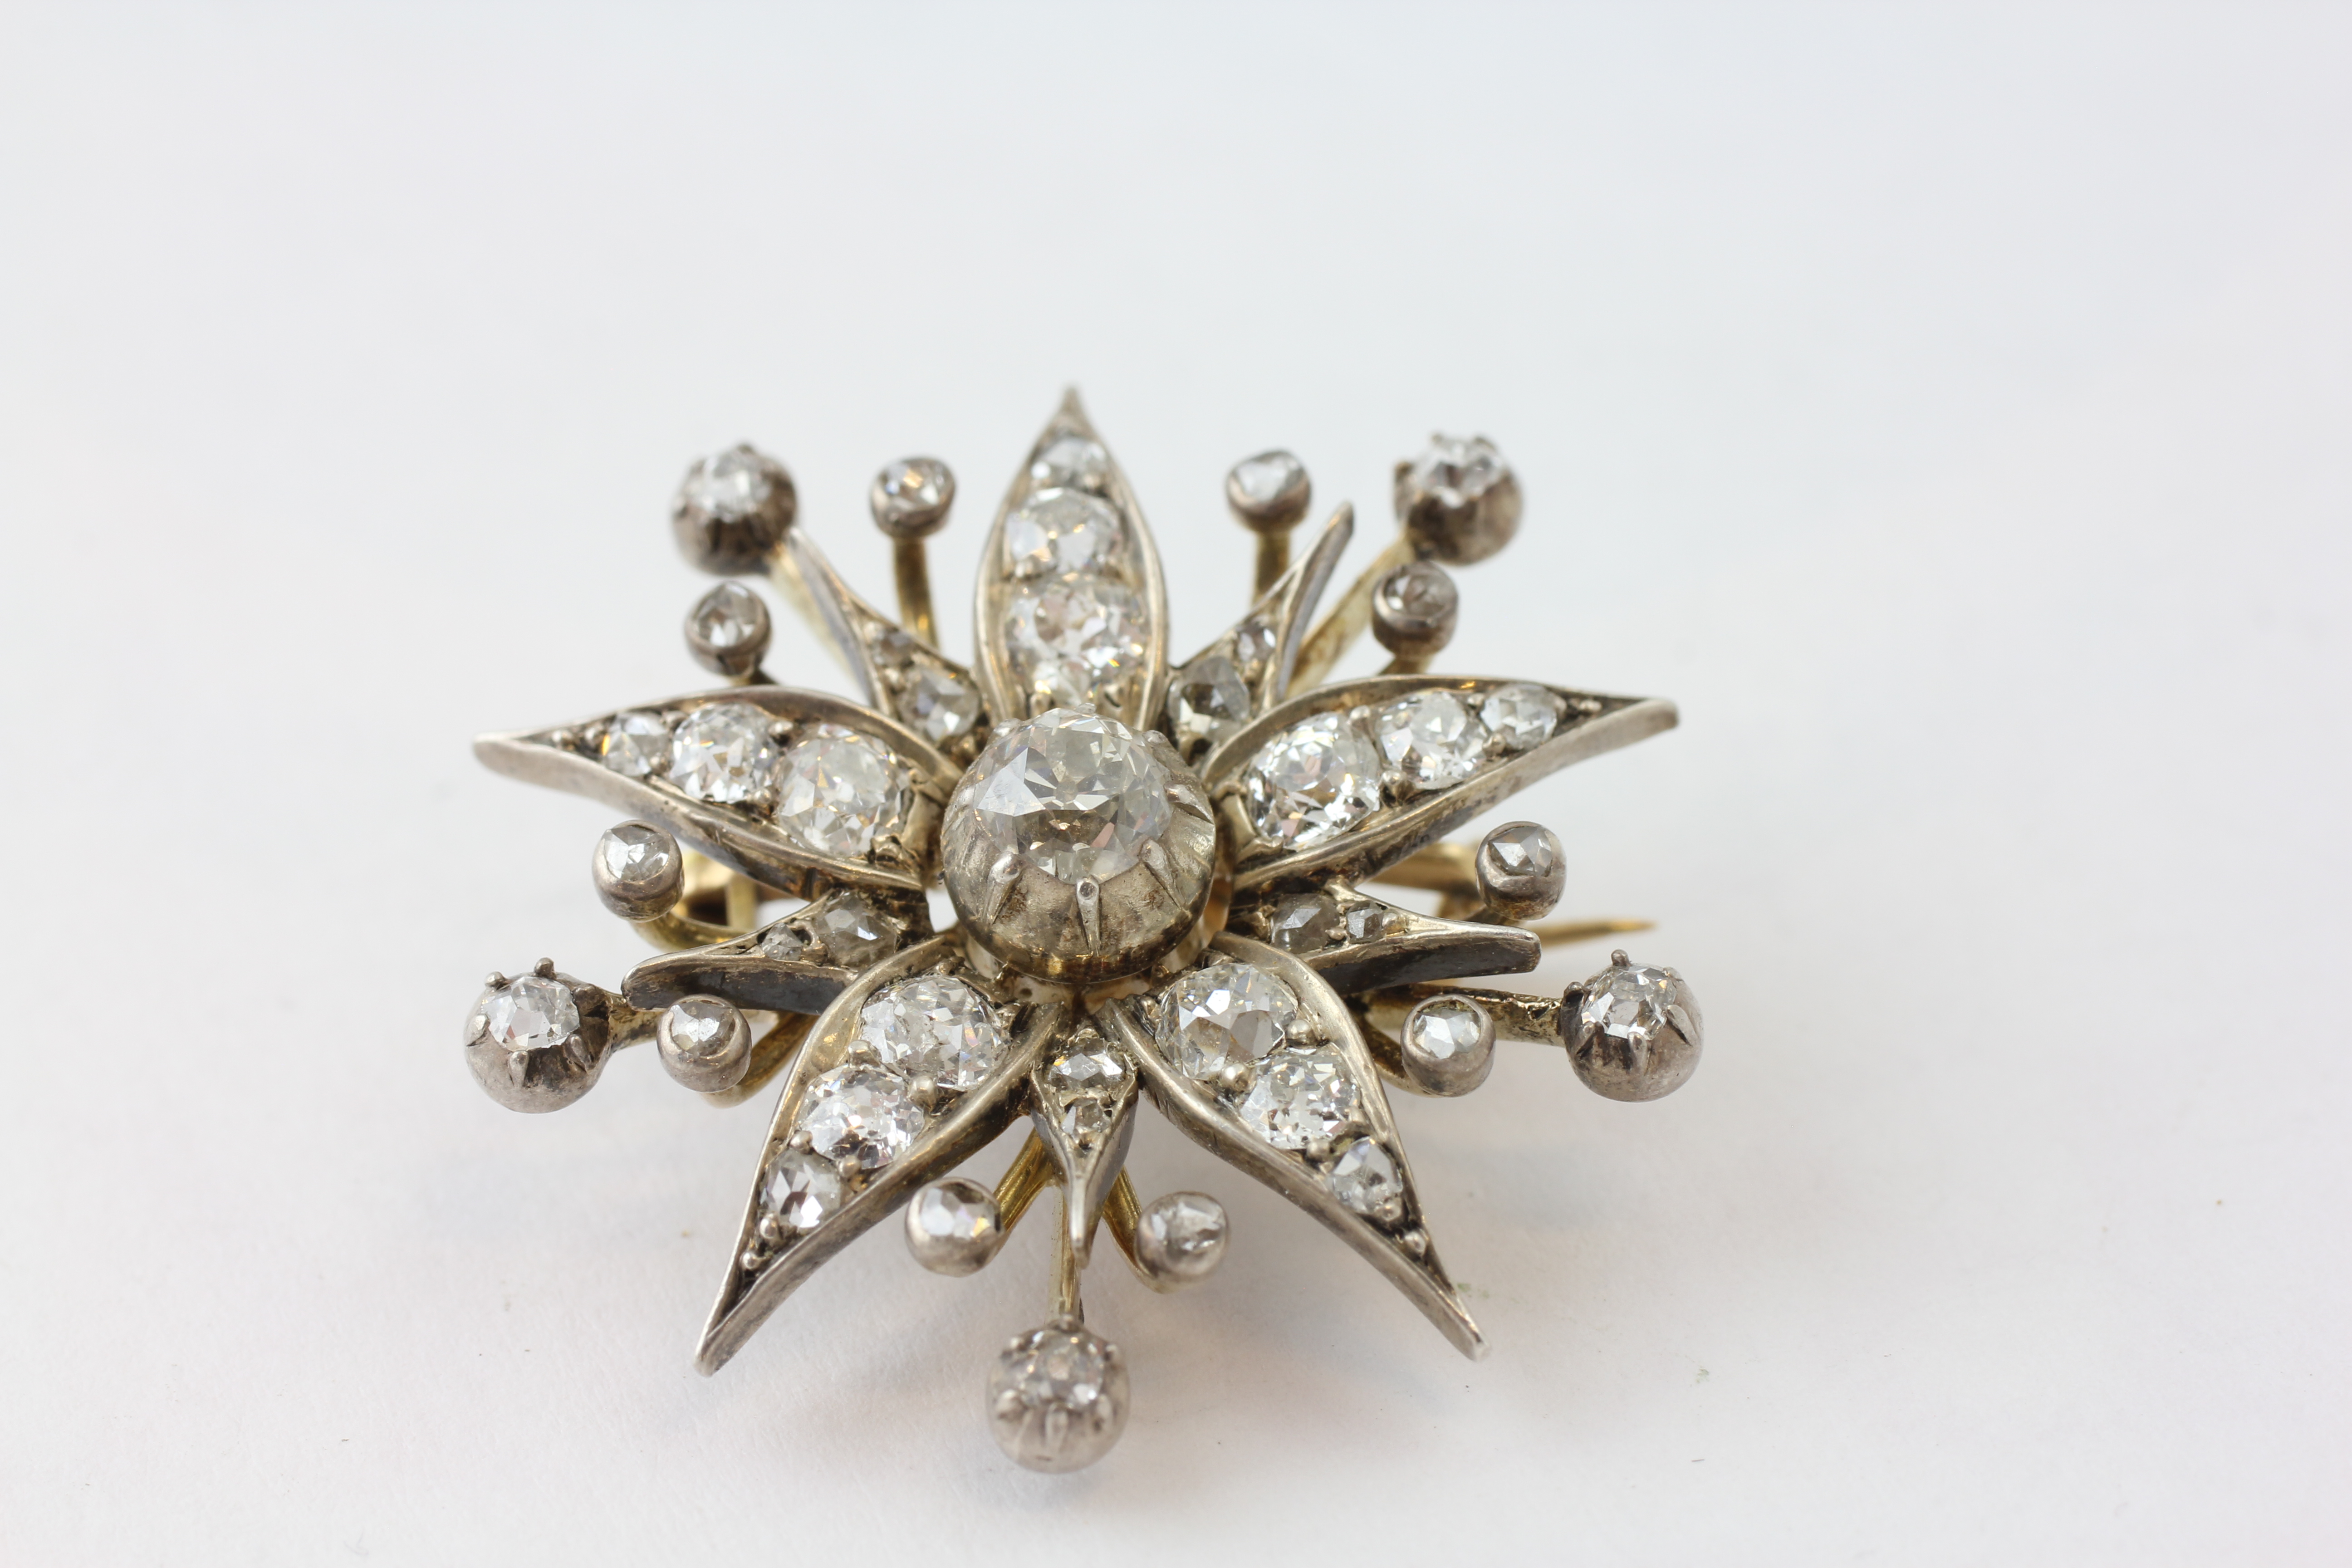 A DIAMOND BROOCH OF FLOWERHEAD FORM WITH ADJUSTMENT FOR A PENDANT, SET WITH 42 OLD CUT DIAMONDS, - Image 2 of 6